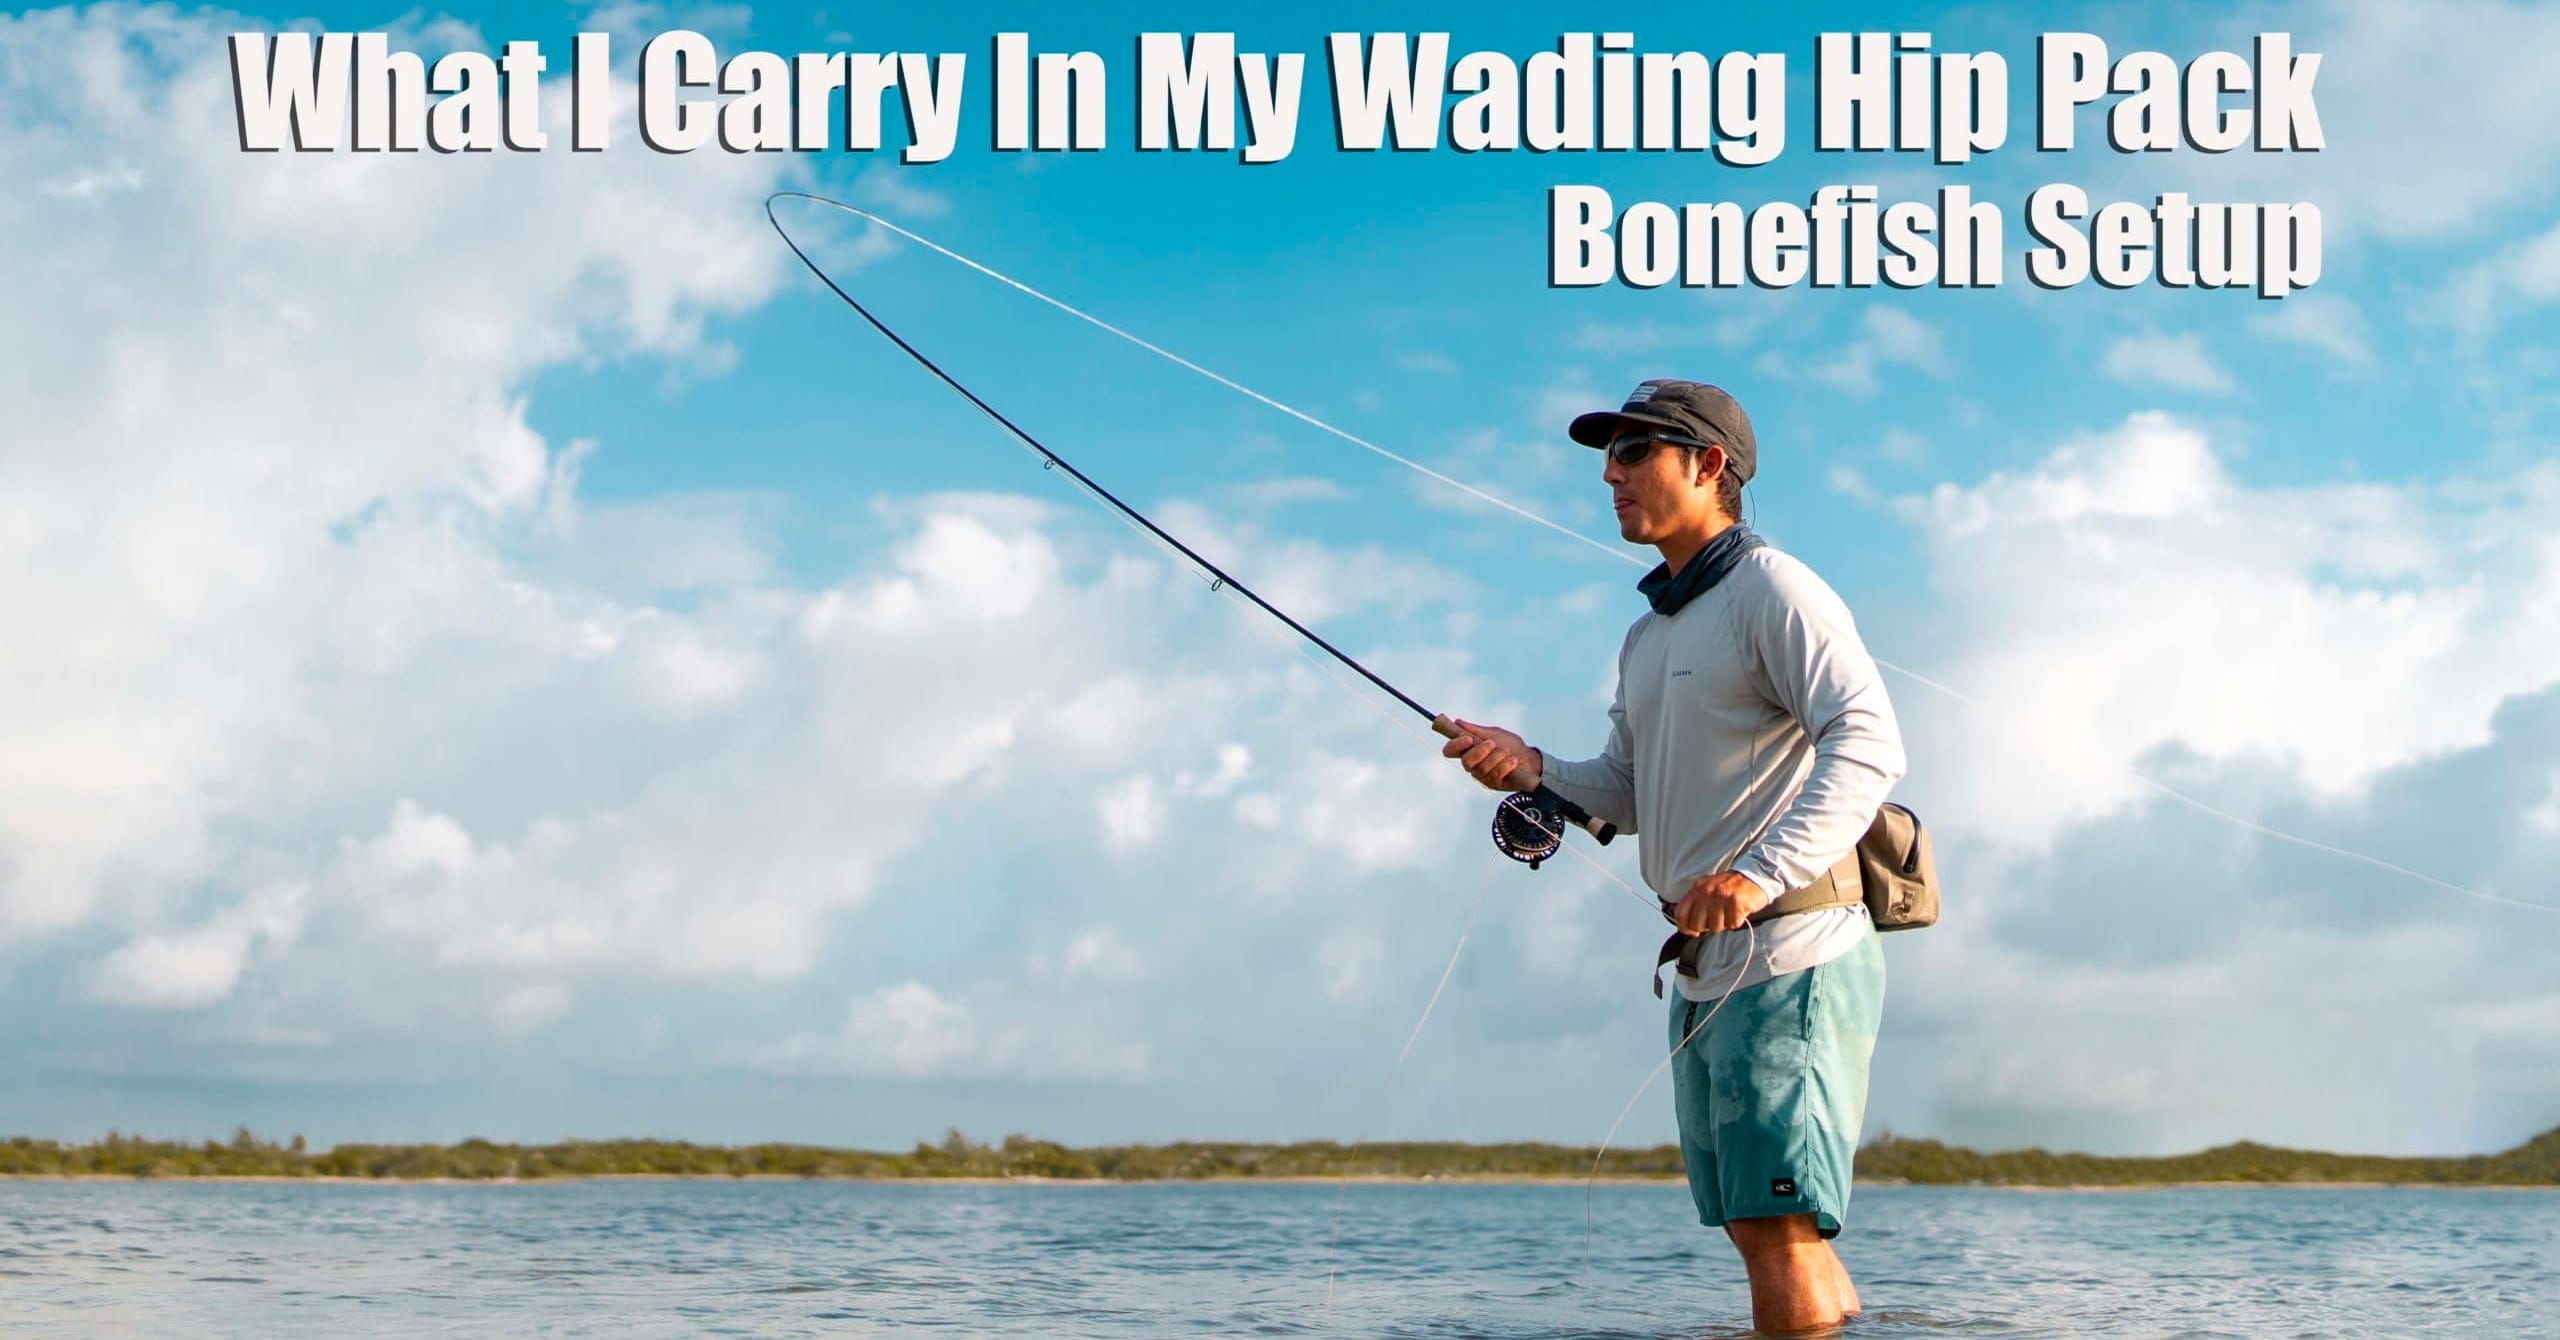 What I Carry In My Wading Hip Pack - Bonefish Setup